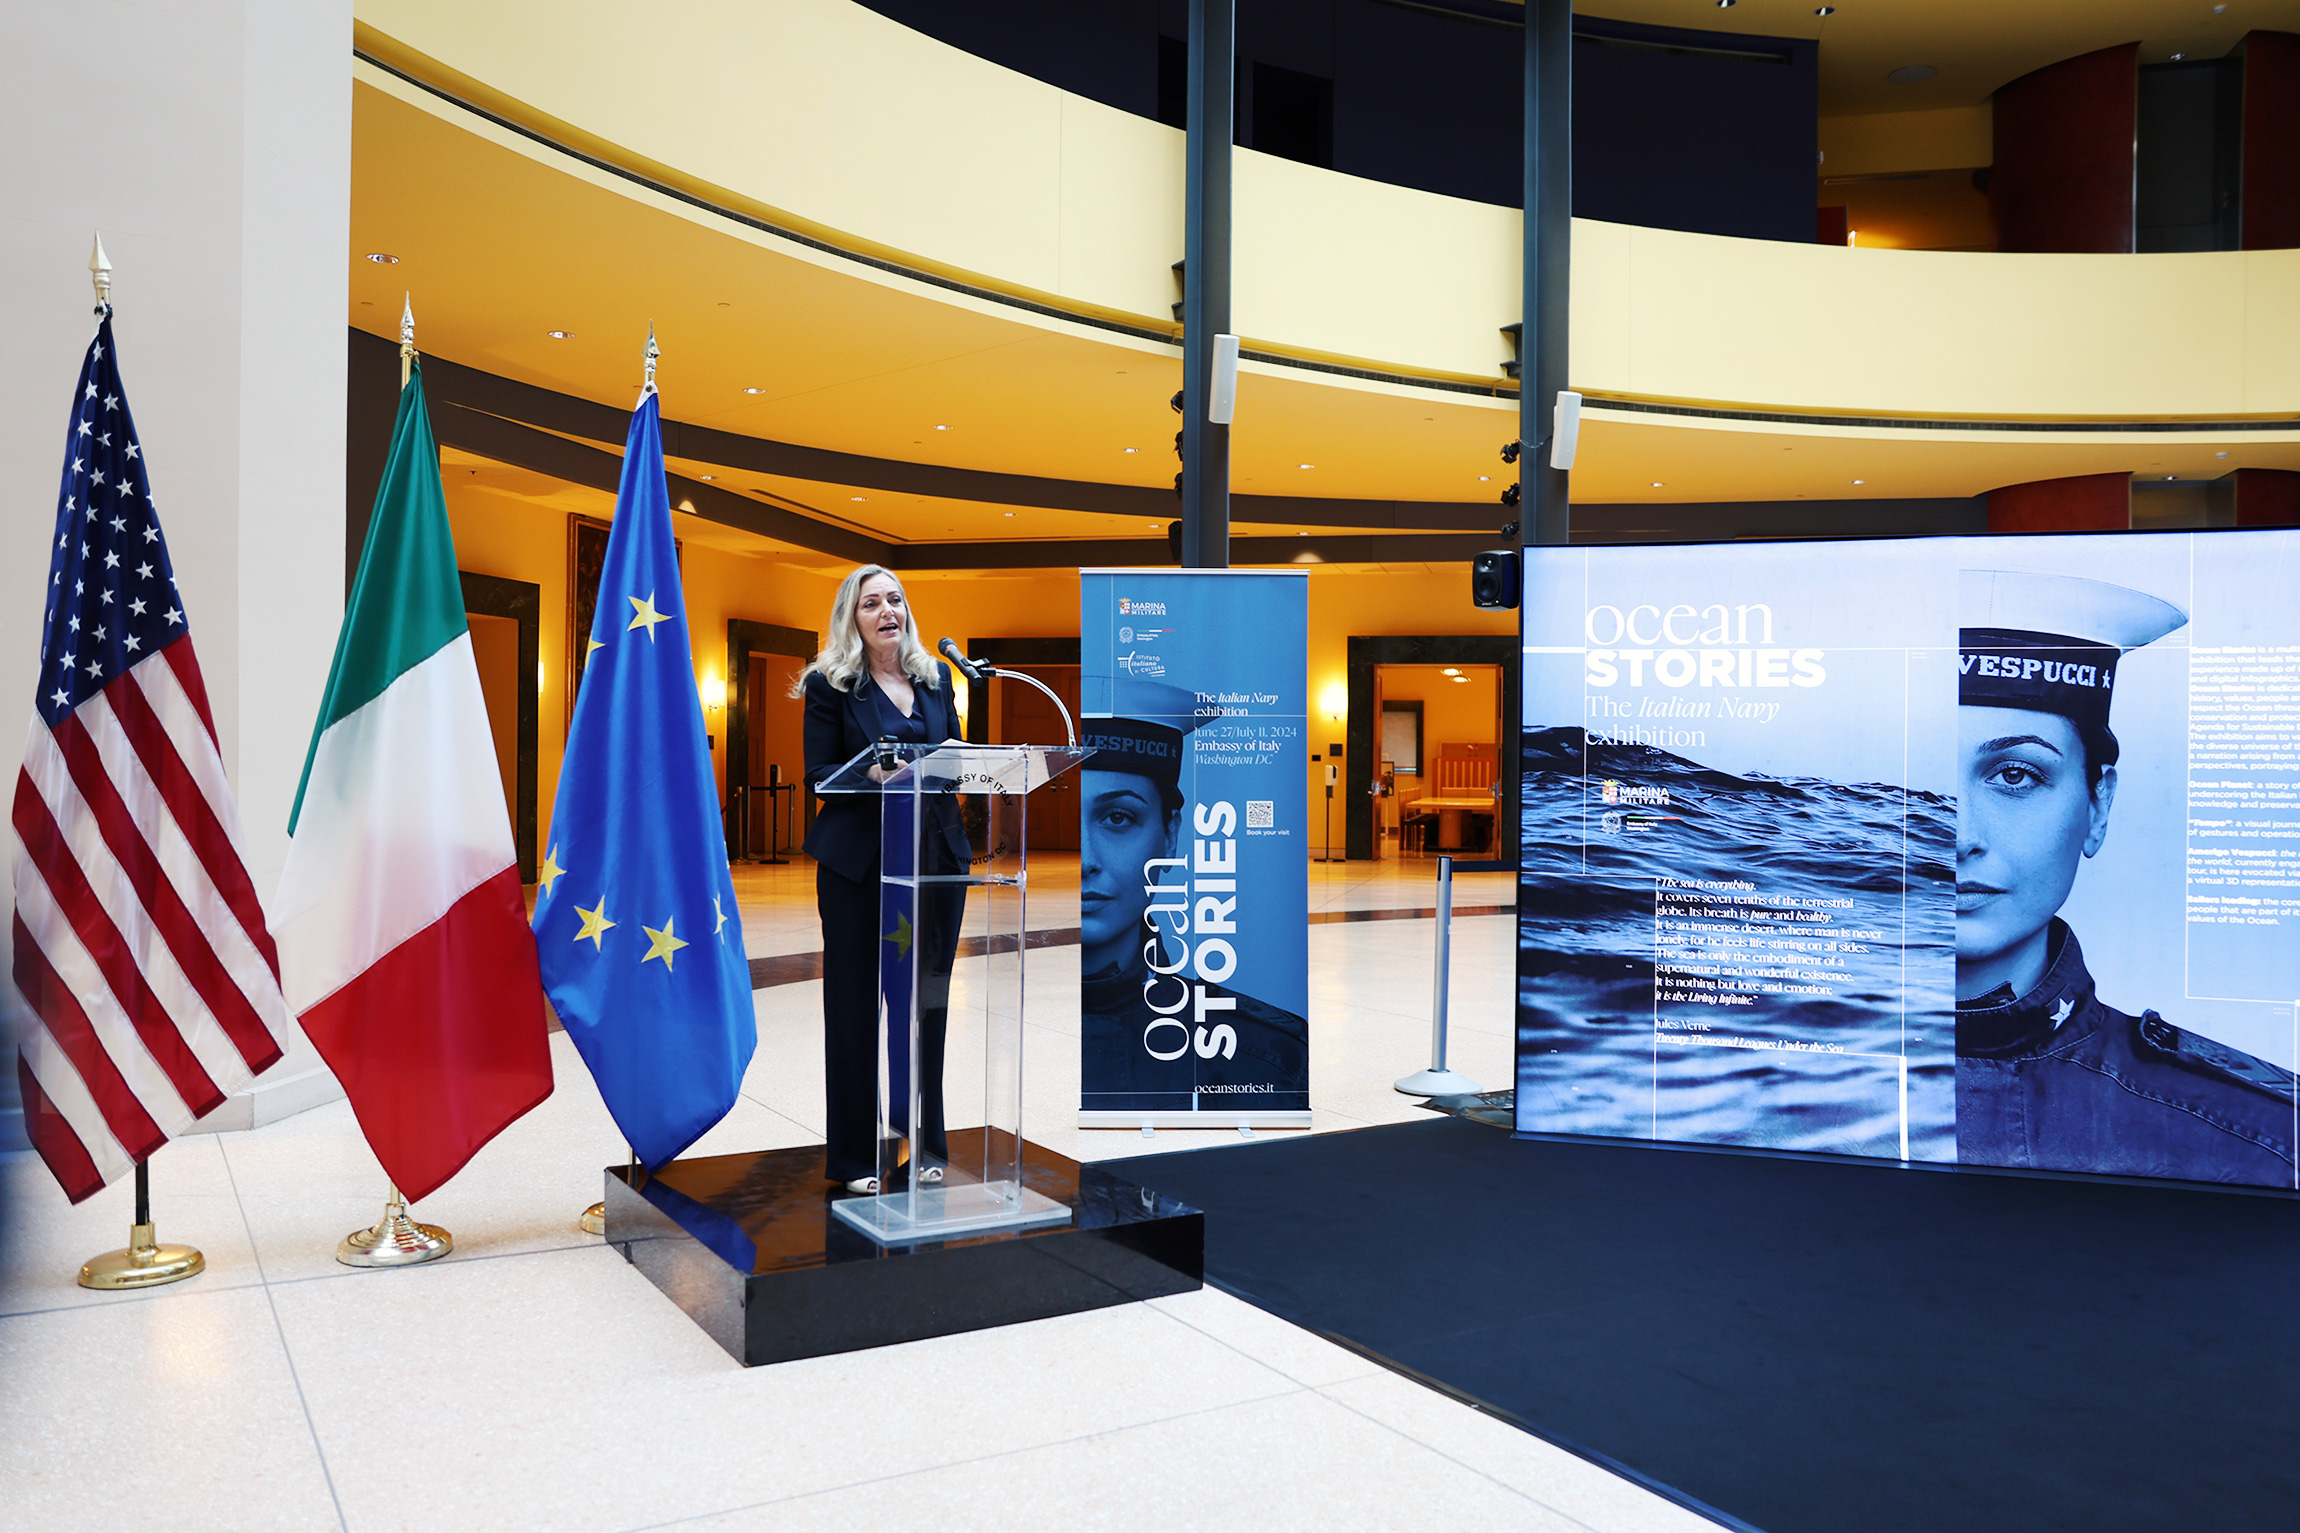 Italian Ambassador Mariangela Zappia at the inauguration of the "Ocean Stories" exhibition by the Italian Navy took place at the Italian Embassy in Washington D.C., in anticipation of the Amerigo Vespucci ship's arrival in Los Angeles